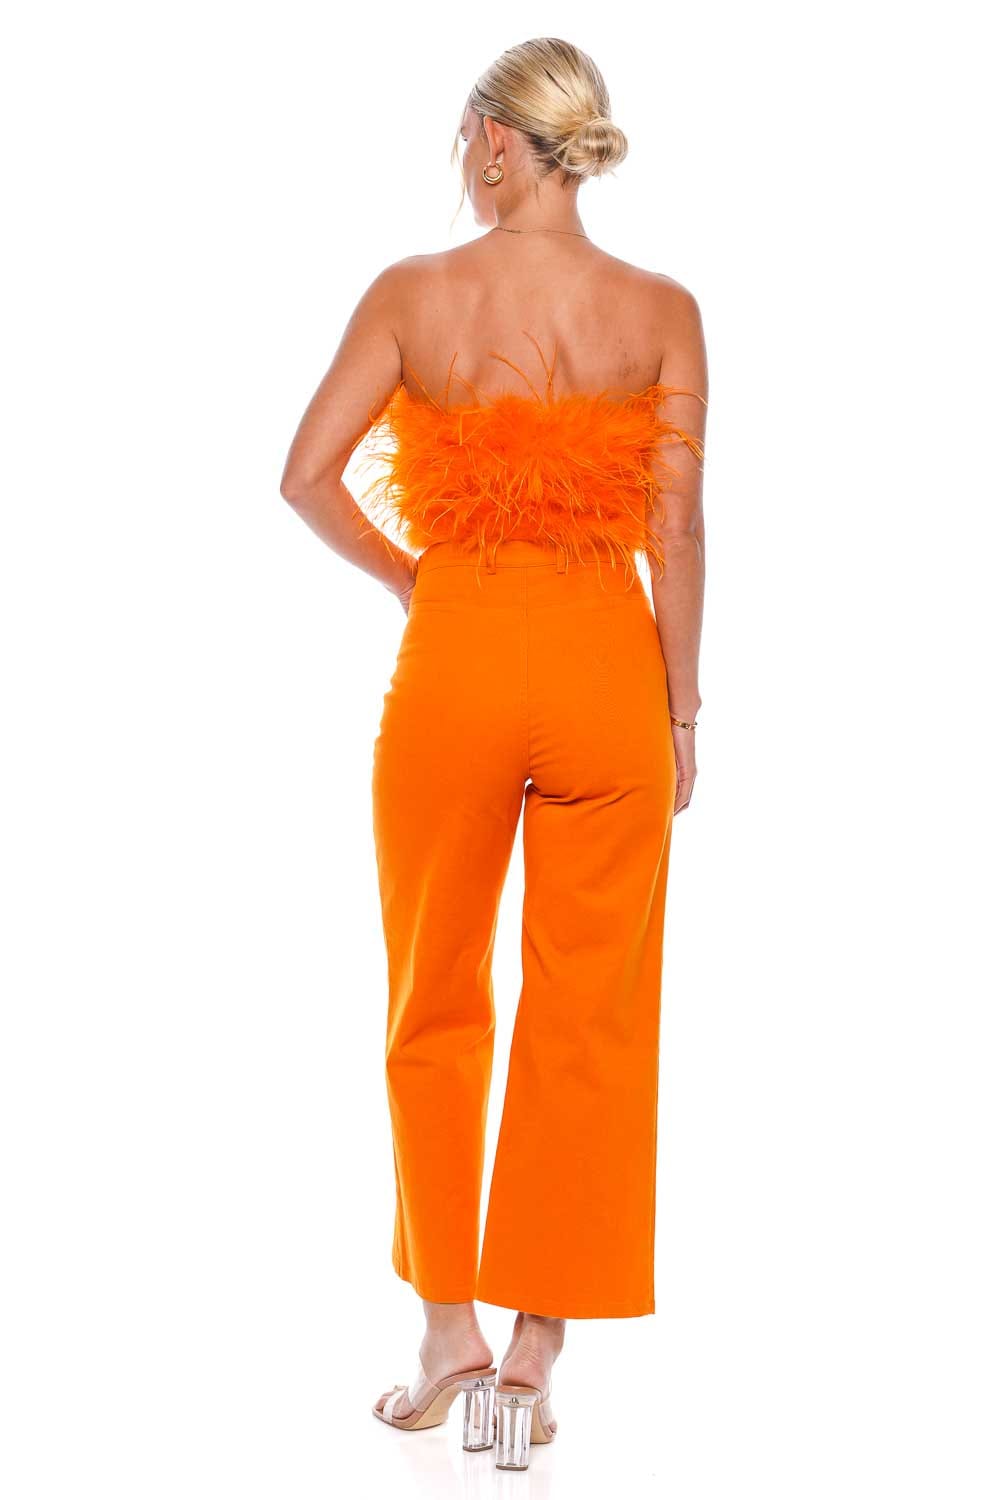 LAPOINTE Tangerine Feathered Strapless Crop Top